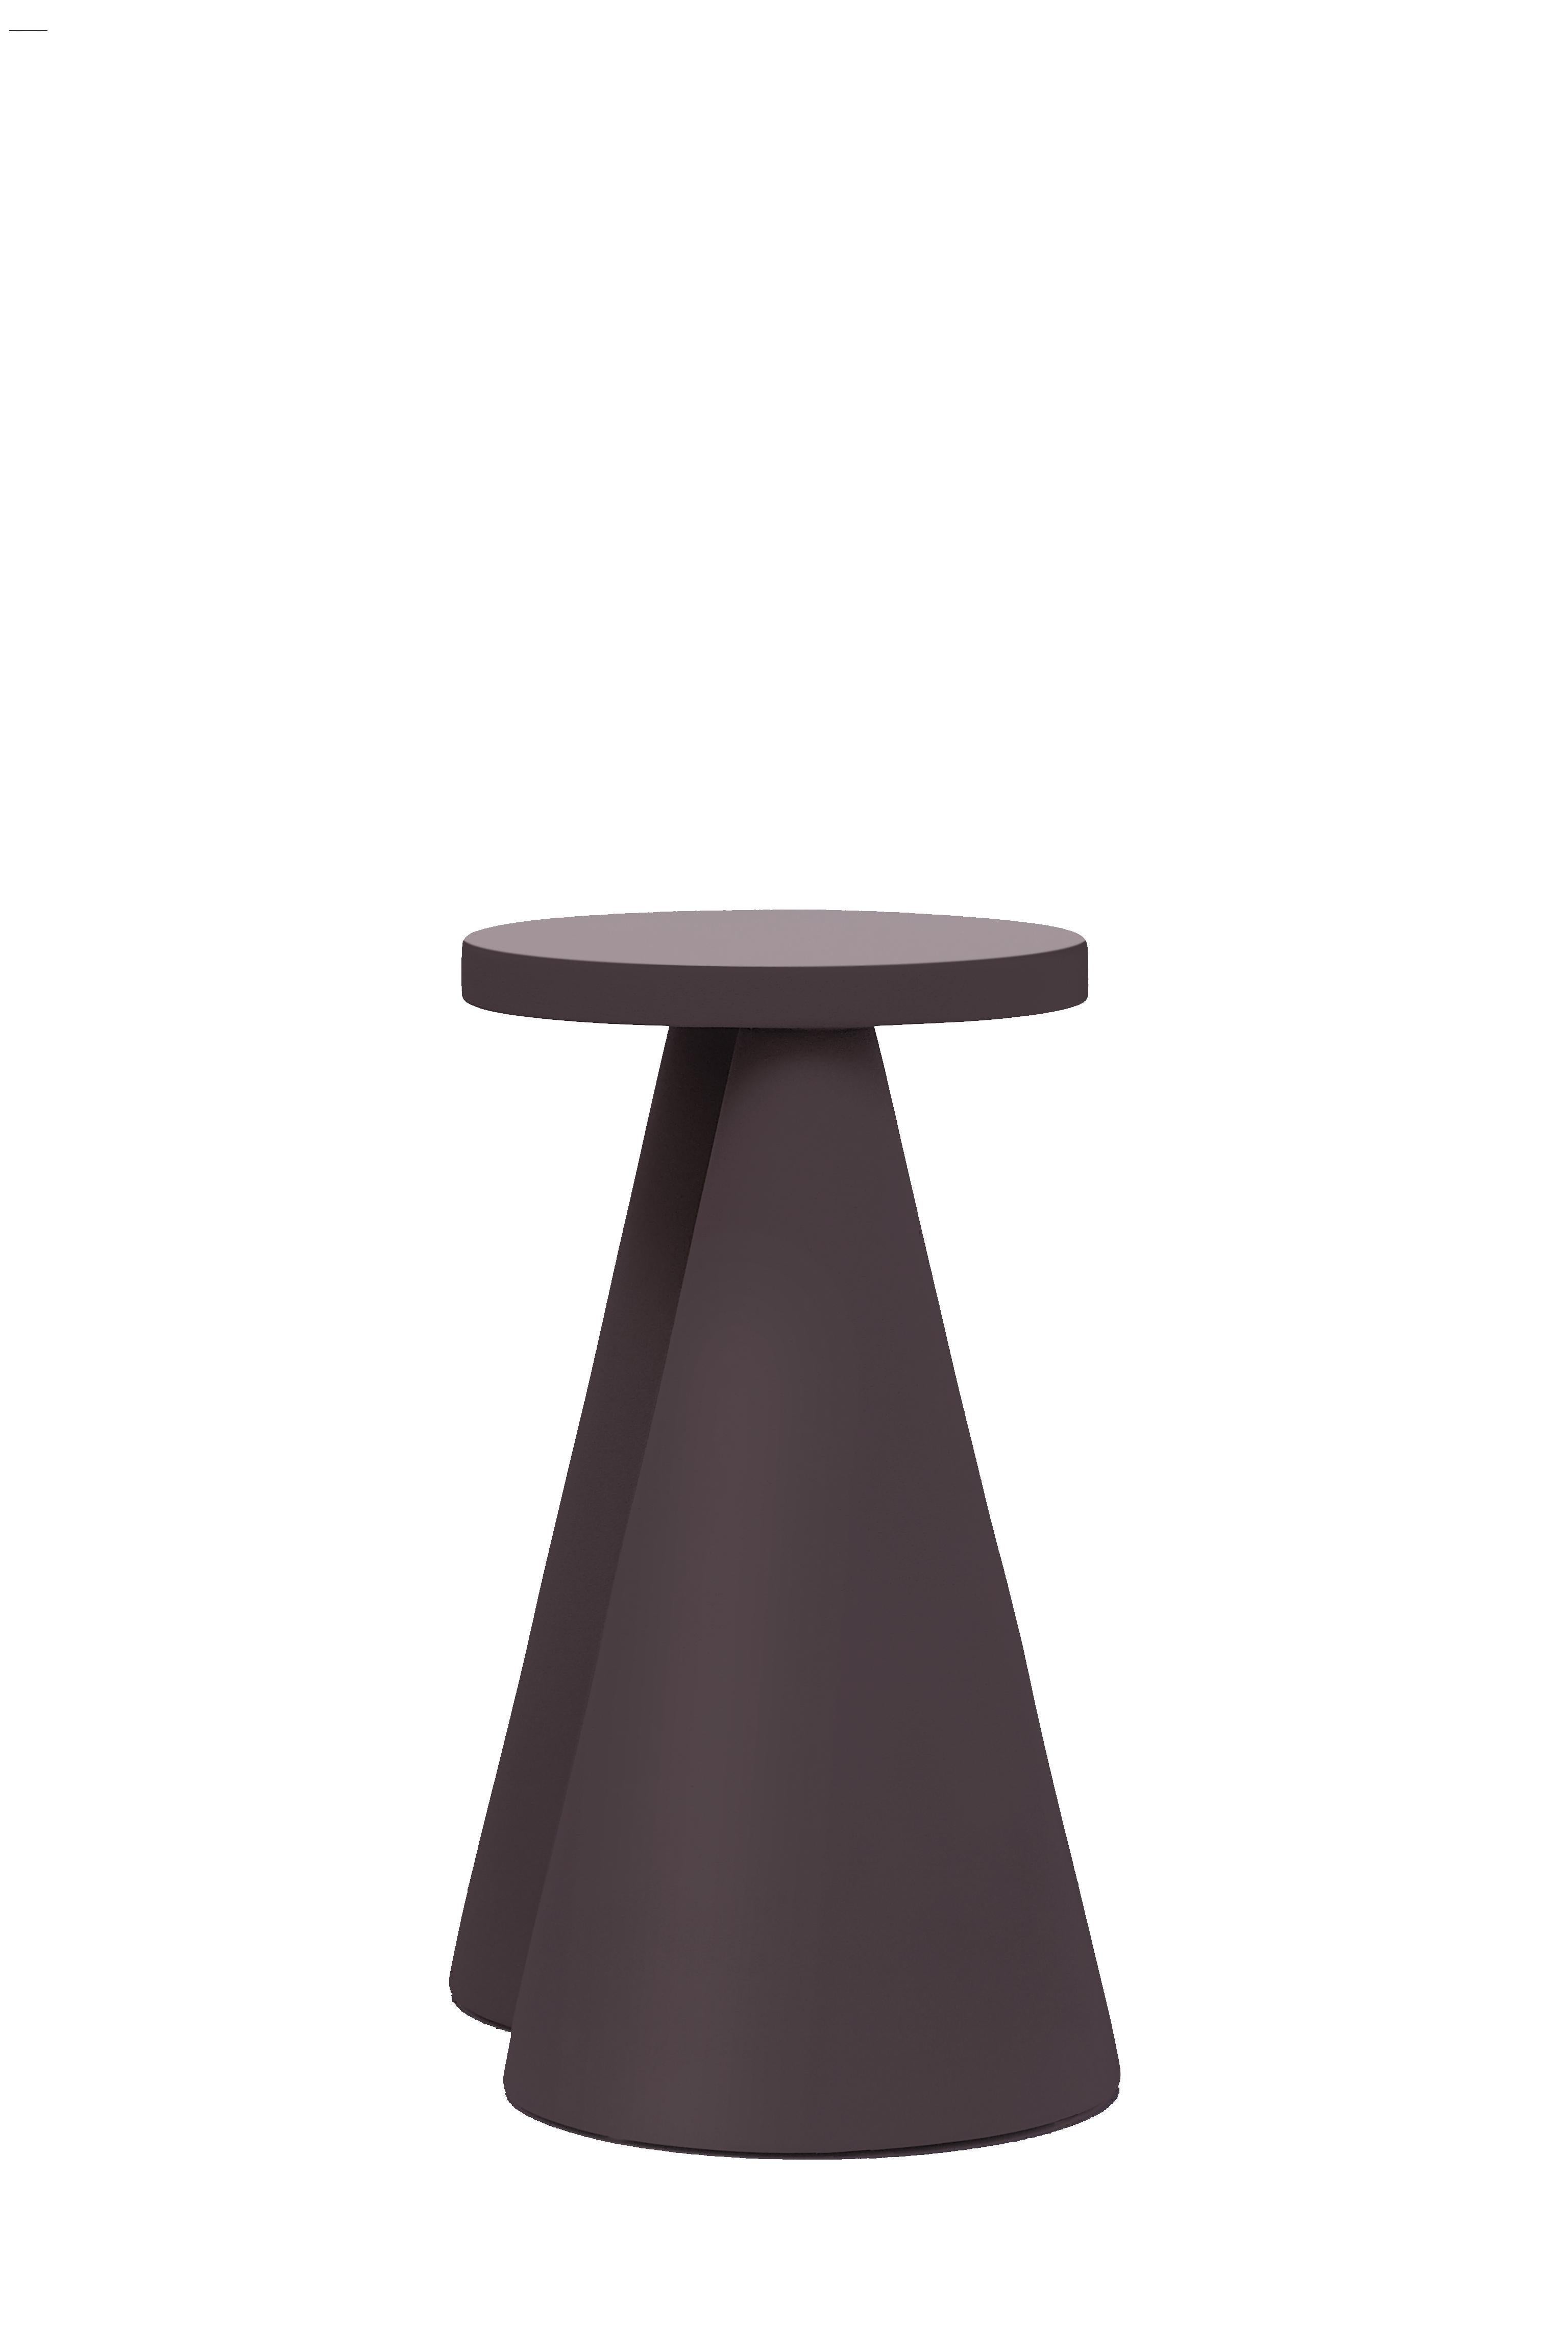 Isola Side Table by Cara Davide 3